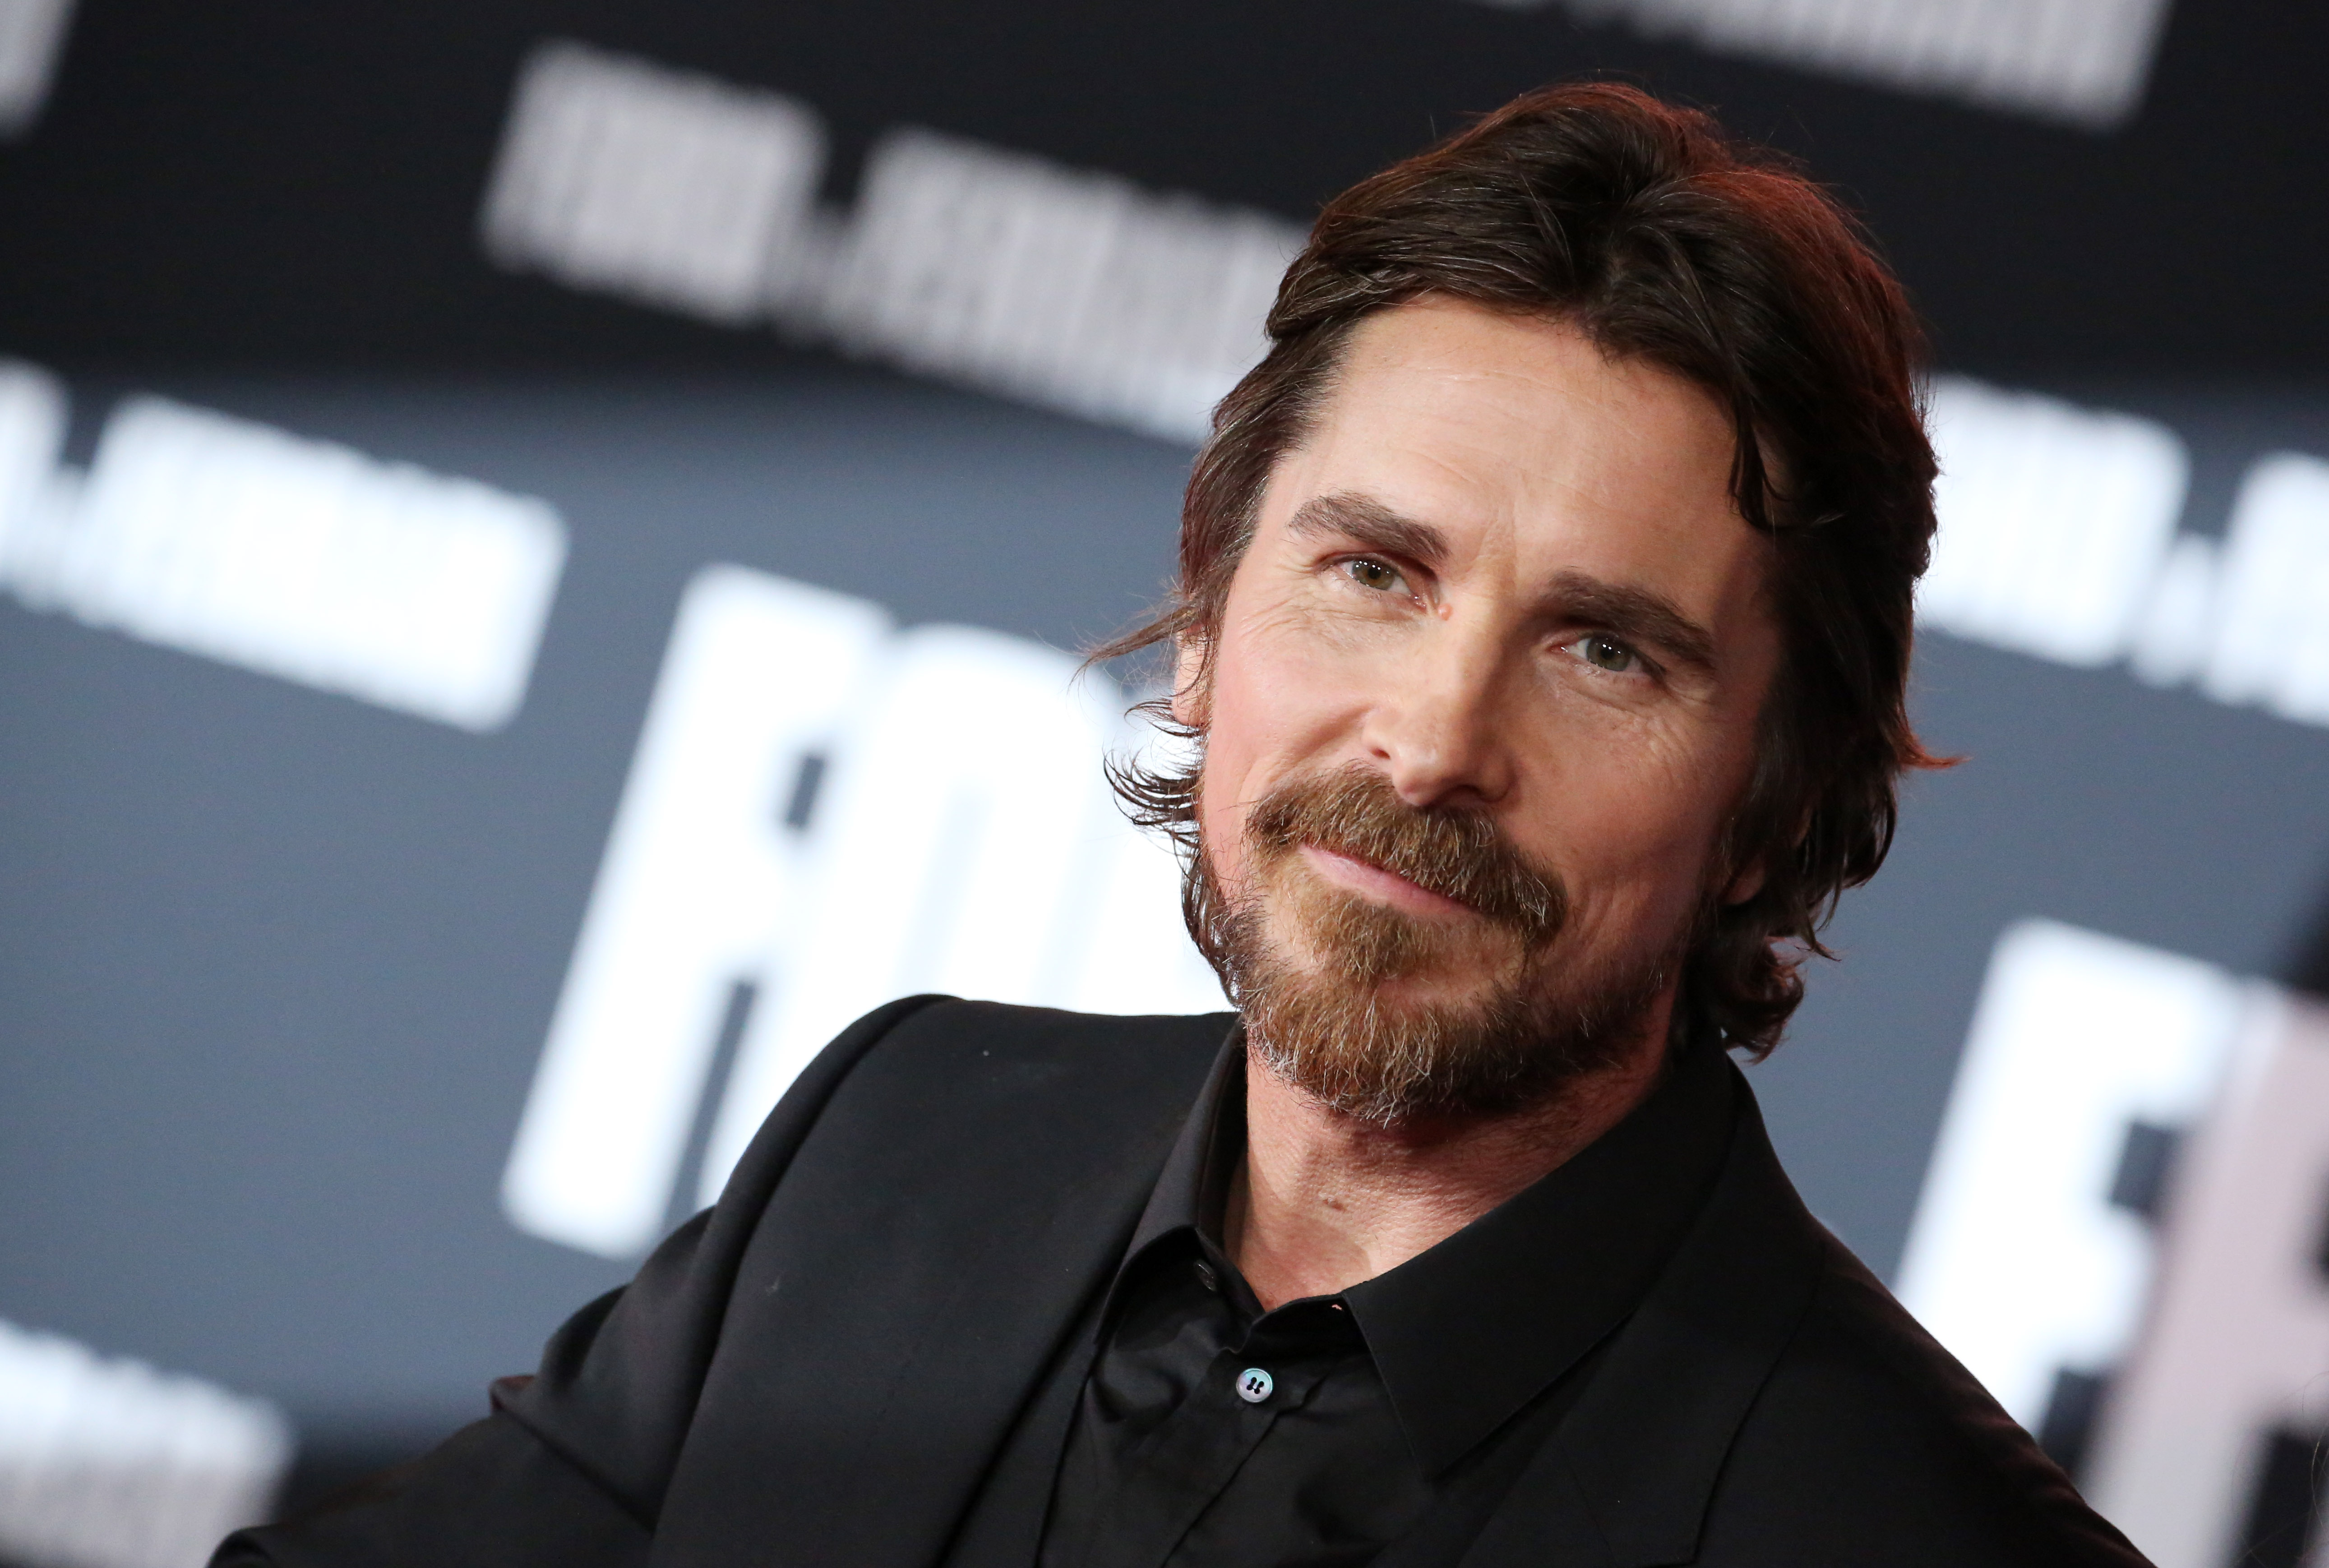 Christian Bale was unaware that it was the Marvel Cinematic Universe Credit: Photo by Matt Baron/Shutterstock (10465665br)